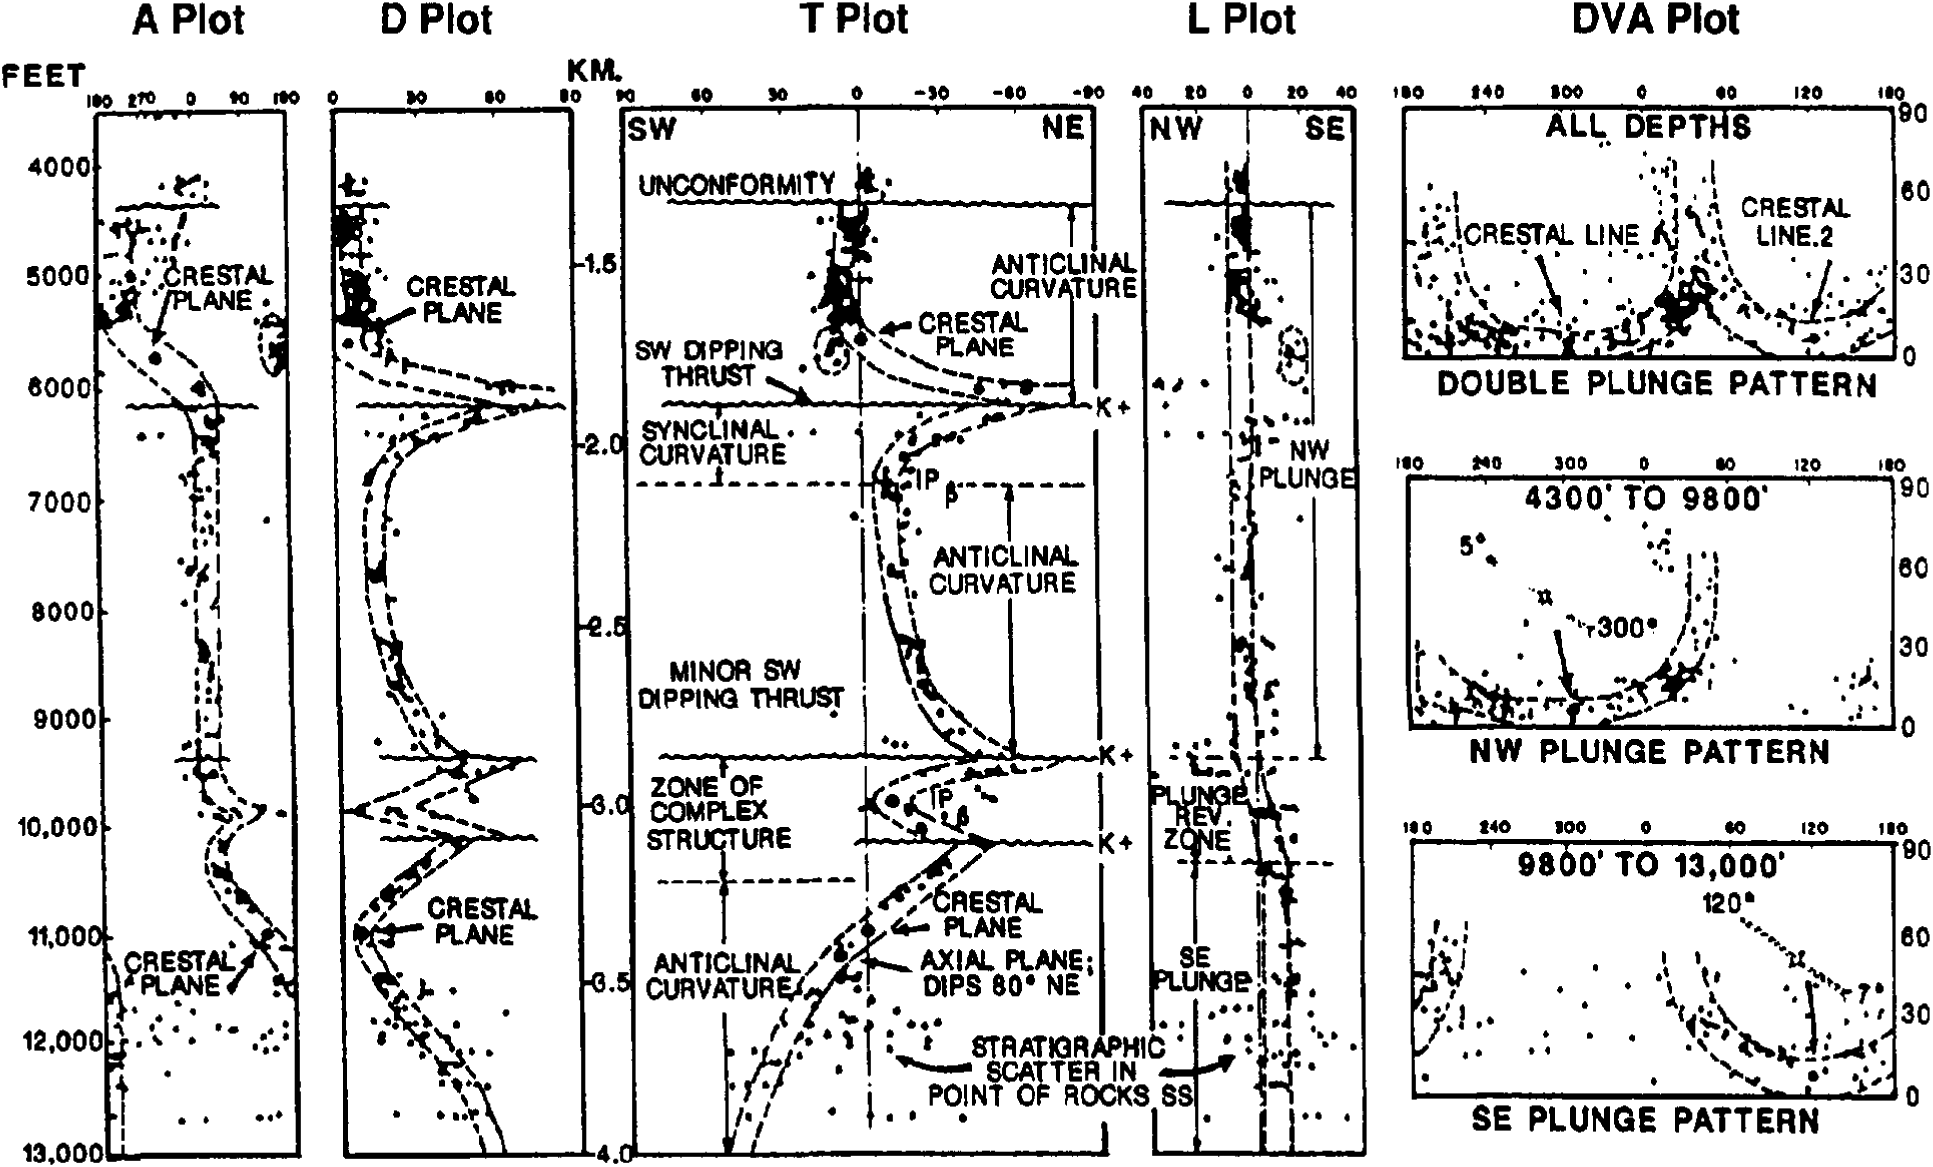 Figure 1. SCAT plots used to define the complex structure seen in the discovery well of the Rail Road Gap oil field, California. The five plot types are (from left to right) azimuth versus depth (A plot), dip versus depth (D plot), dip versus depth in the direction of greatest curvature (T plot), dip versus depth in the direction of least curvature (L plot), and dip versus azimuth (DVA plot). (From Bengtsen.[1])